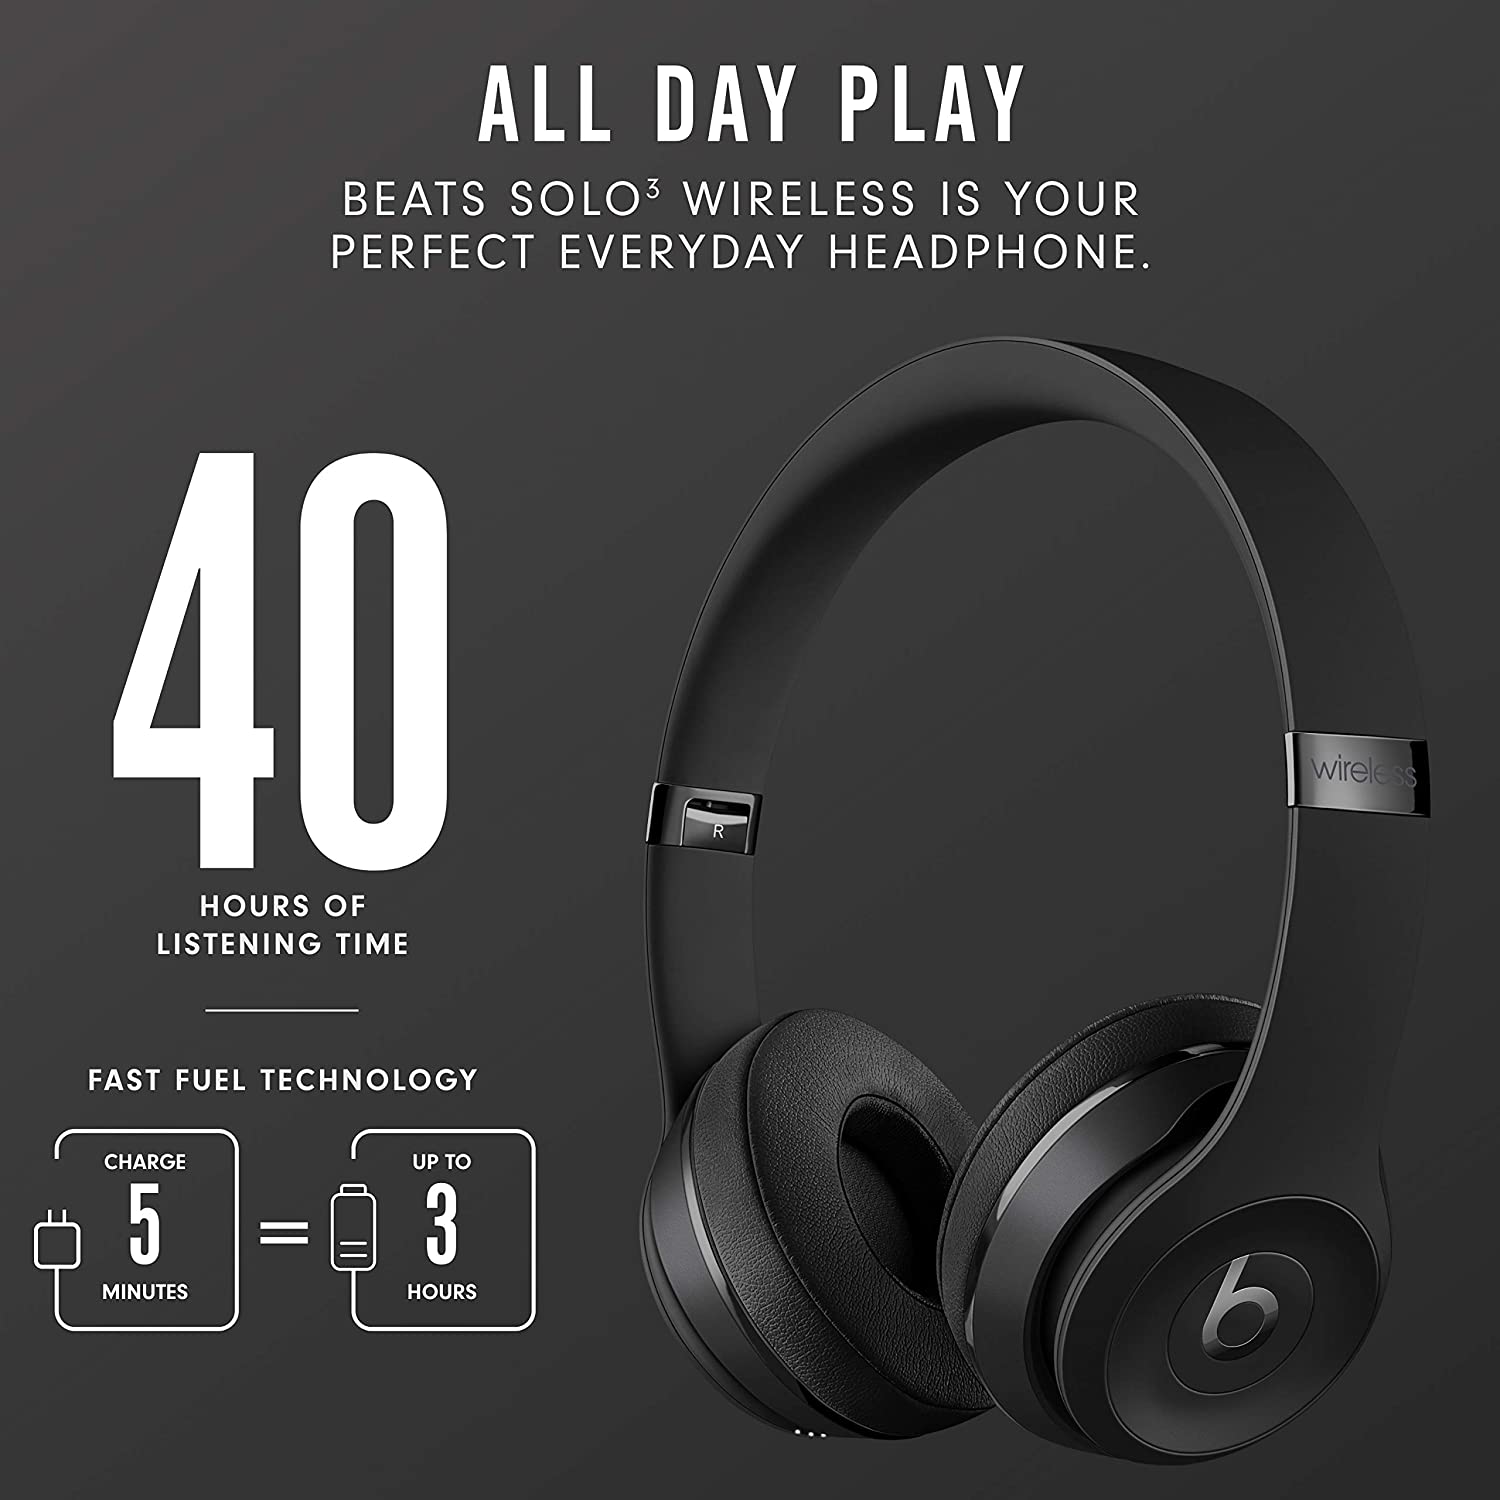 Beats Solo3 gets a massive 33% discount on Amazon, get it for only $133.99